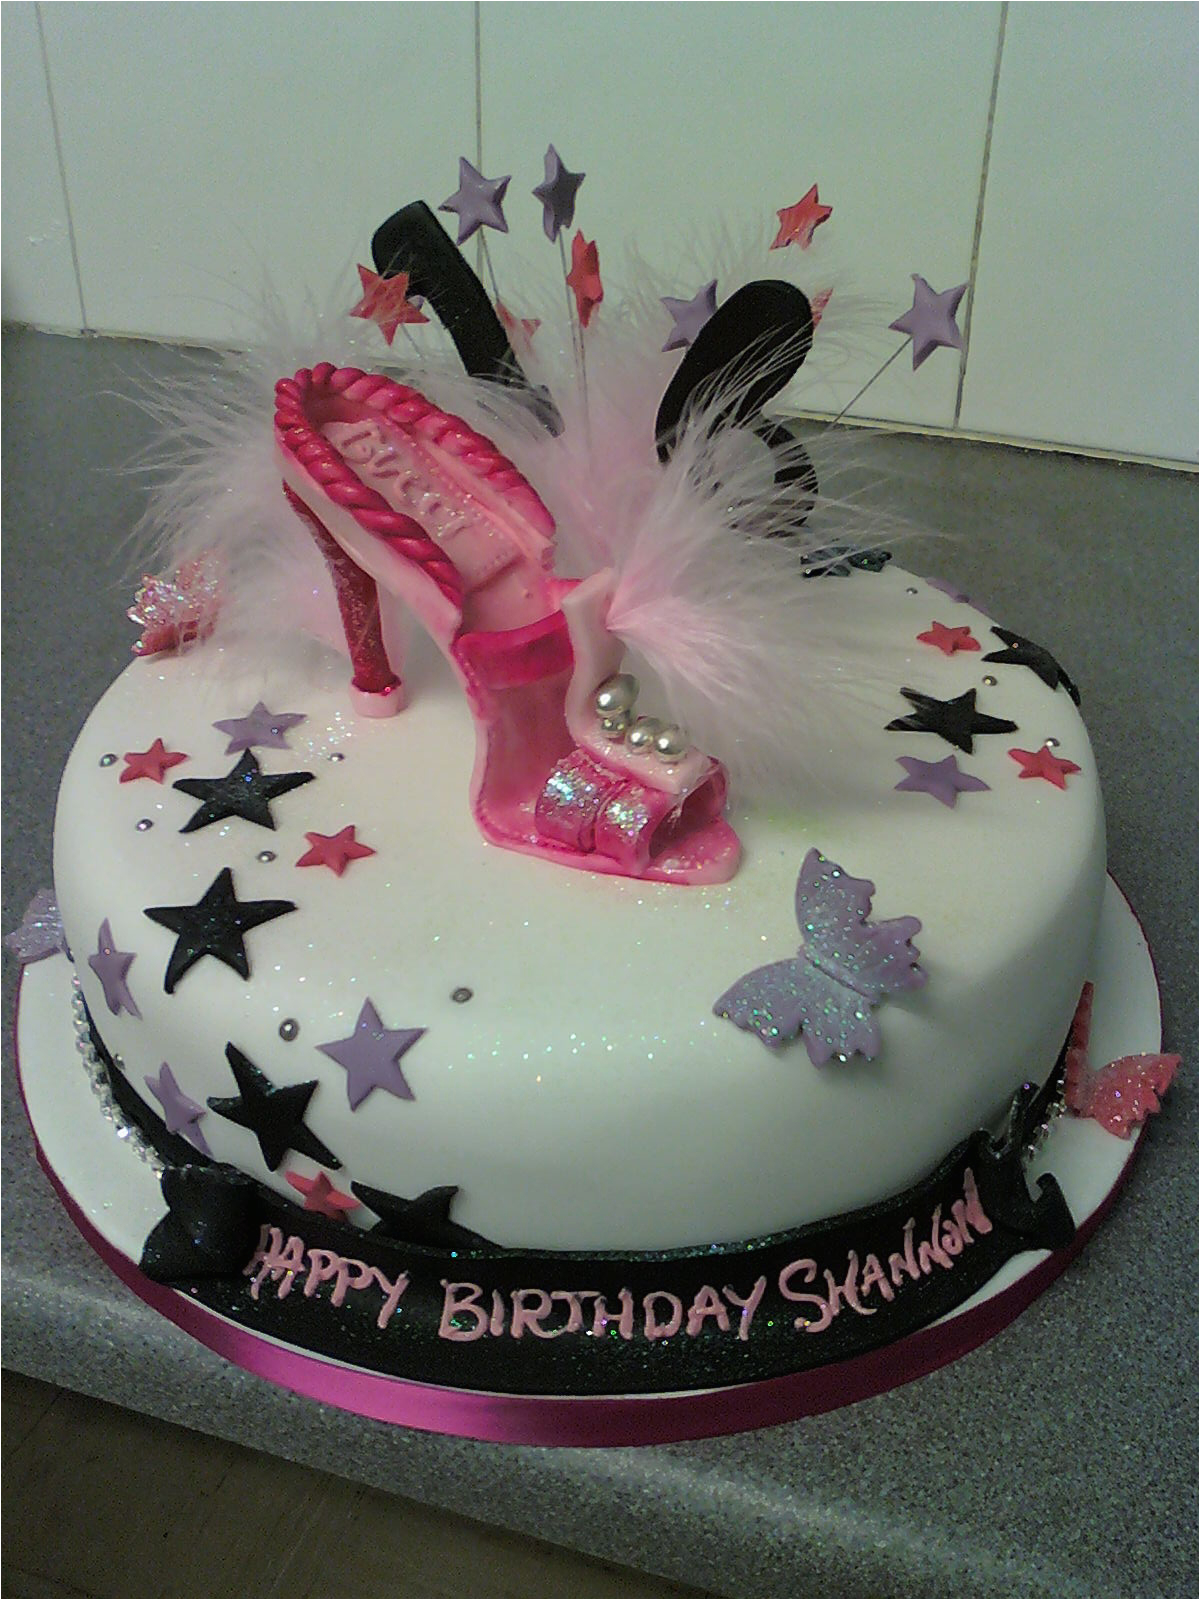 16th Birthday Cake Decorations Pin Cake Ideas for Sweet 16th Birthday Designs Cake On